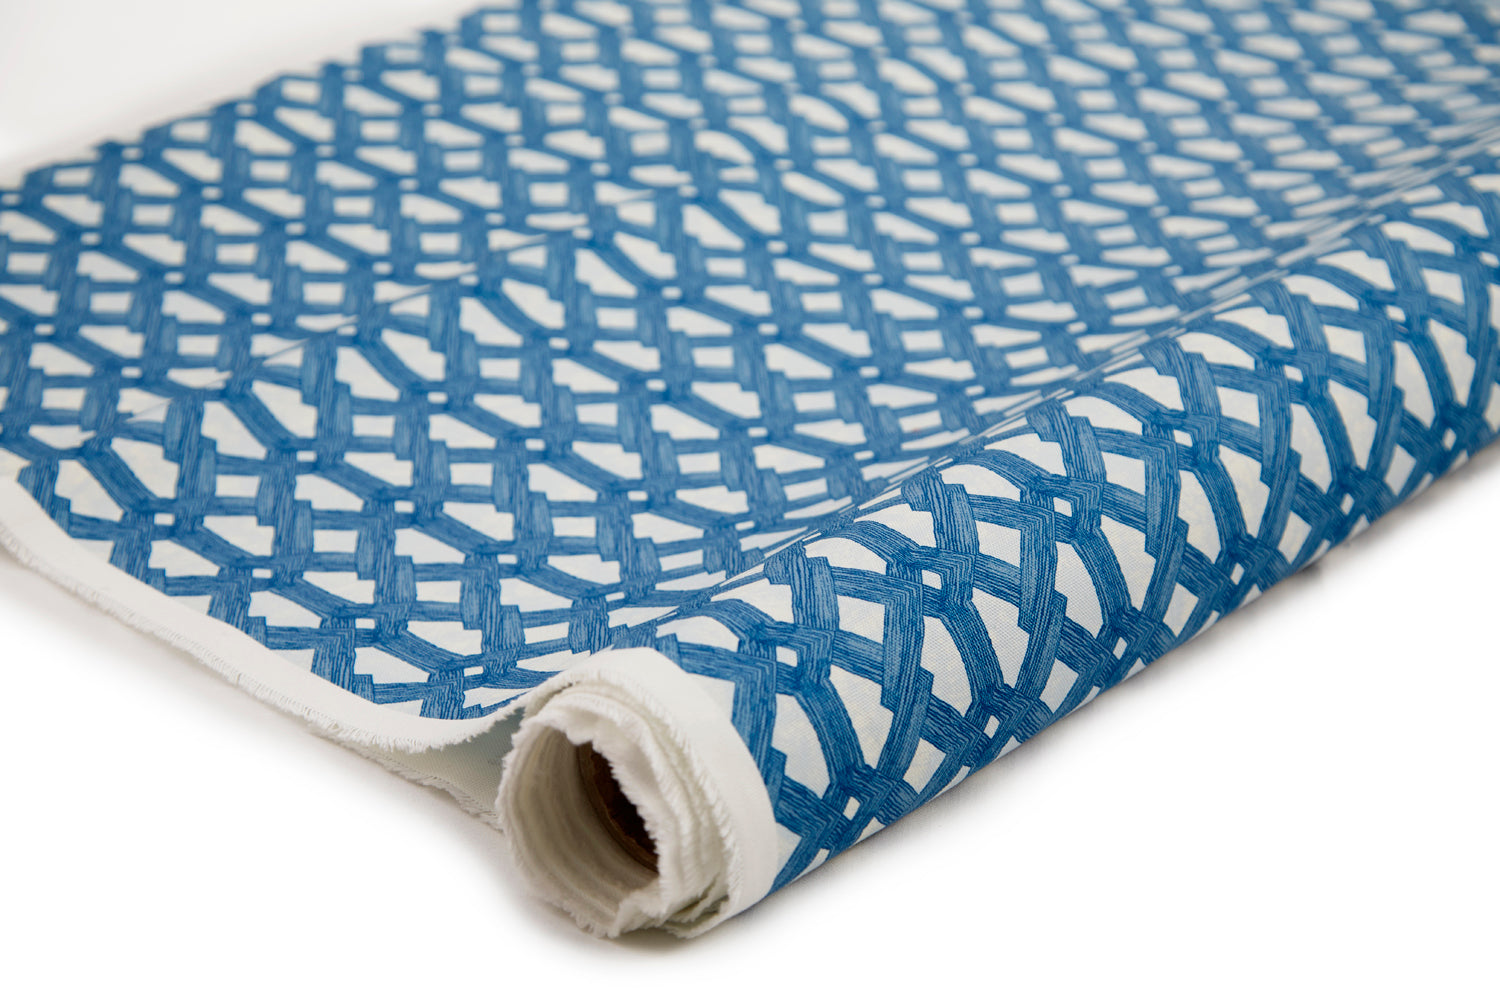 Partially unrolled fabric in an intricate lattice print in navy on a cream field.